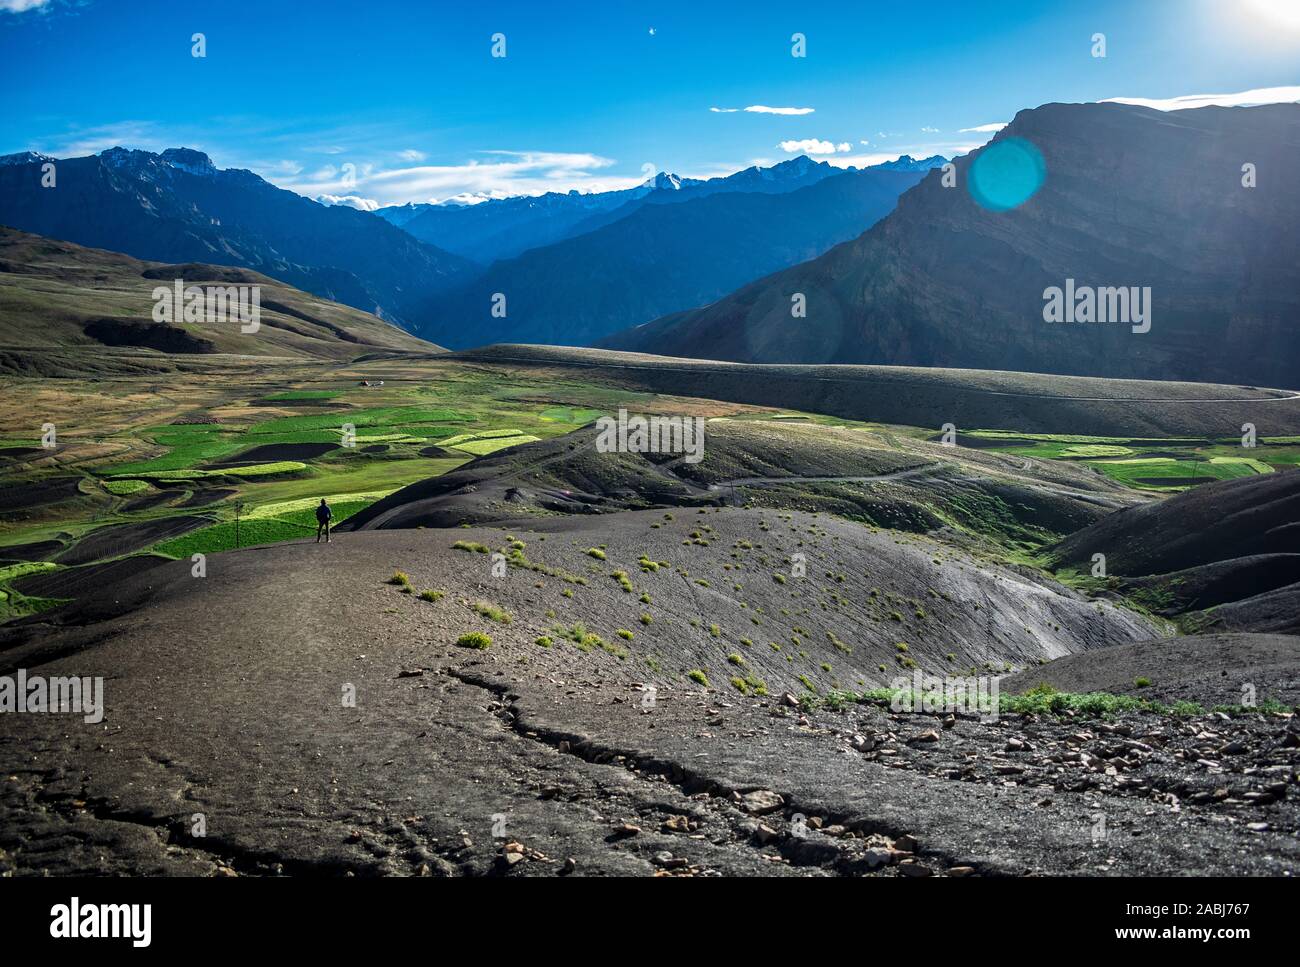 Beautiful mountains in daylight with a man standing below Stock Photo